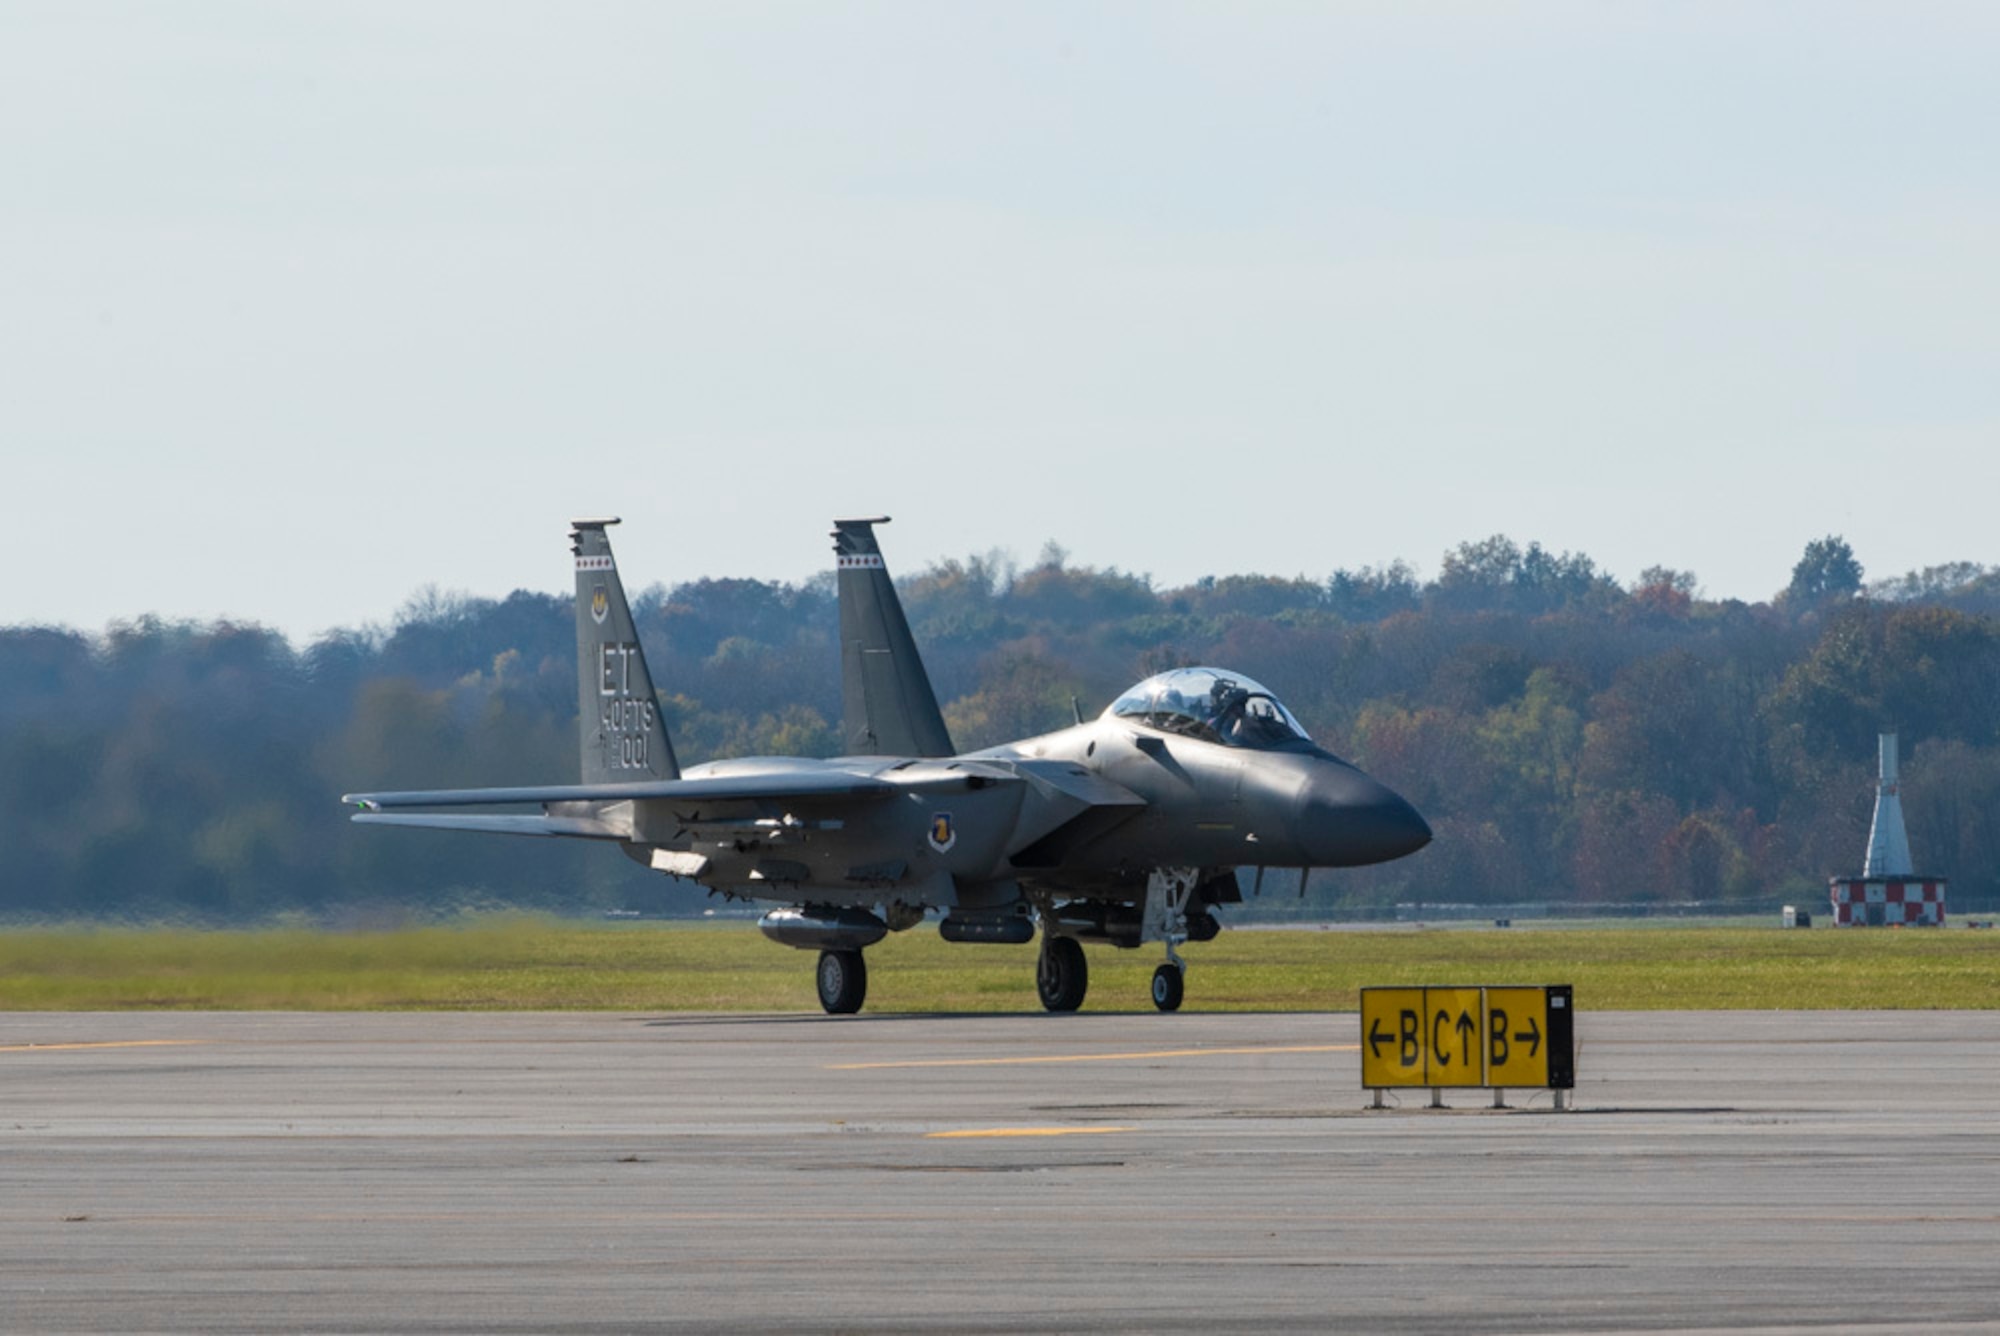 An F-15EX fighter jet taxis to its parking spot at Wright-Patterson Air Force Base, Ohio, Nov. 8, 2021. The jet visited Wright-Patt to give the Air Force Life Cycle Management Center’s F-15EX Program team the opportunity to see the aircraft up close. (U.S. Air Force photo by Jaima Fogg)